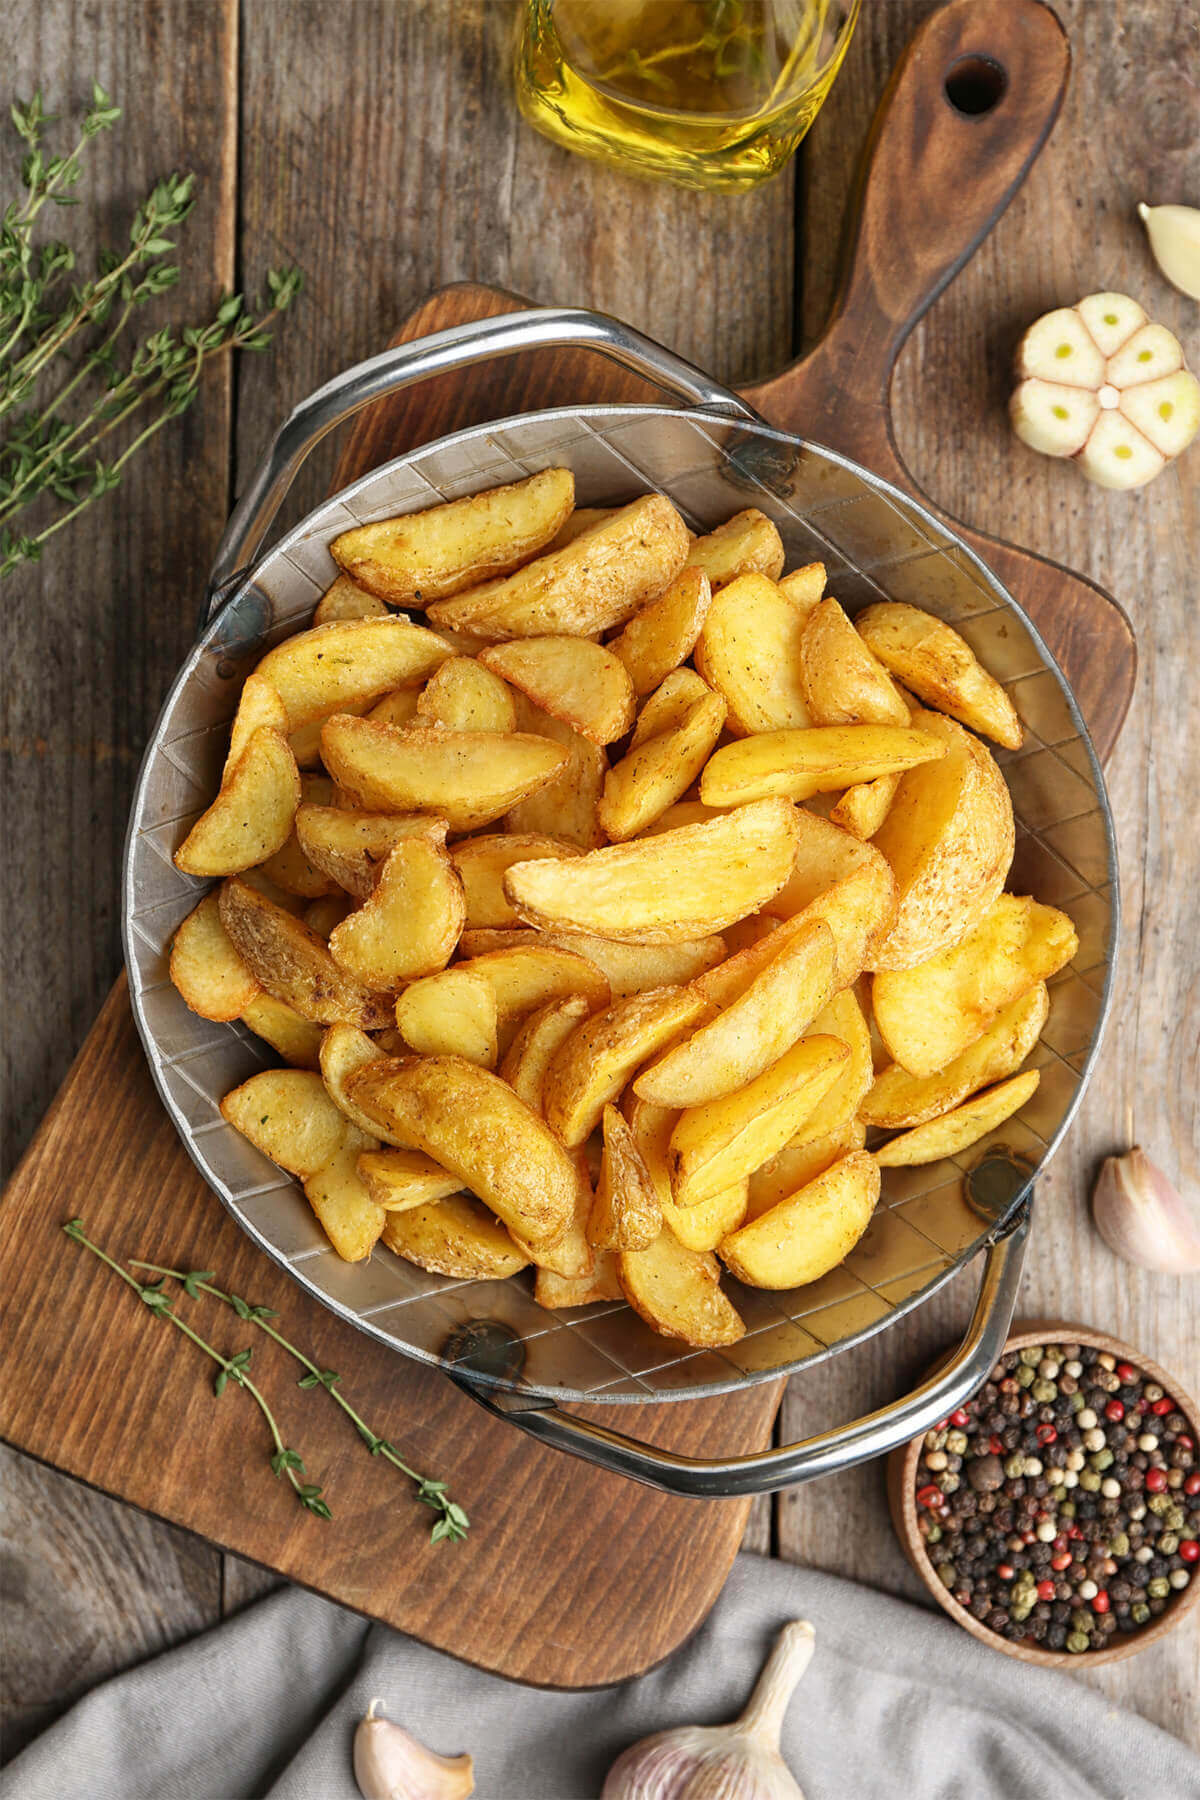 Top view of a round metal tray piled with fried potato wedges